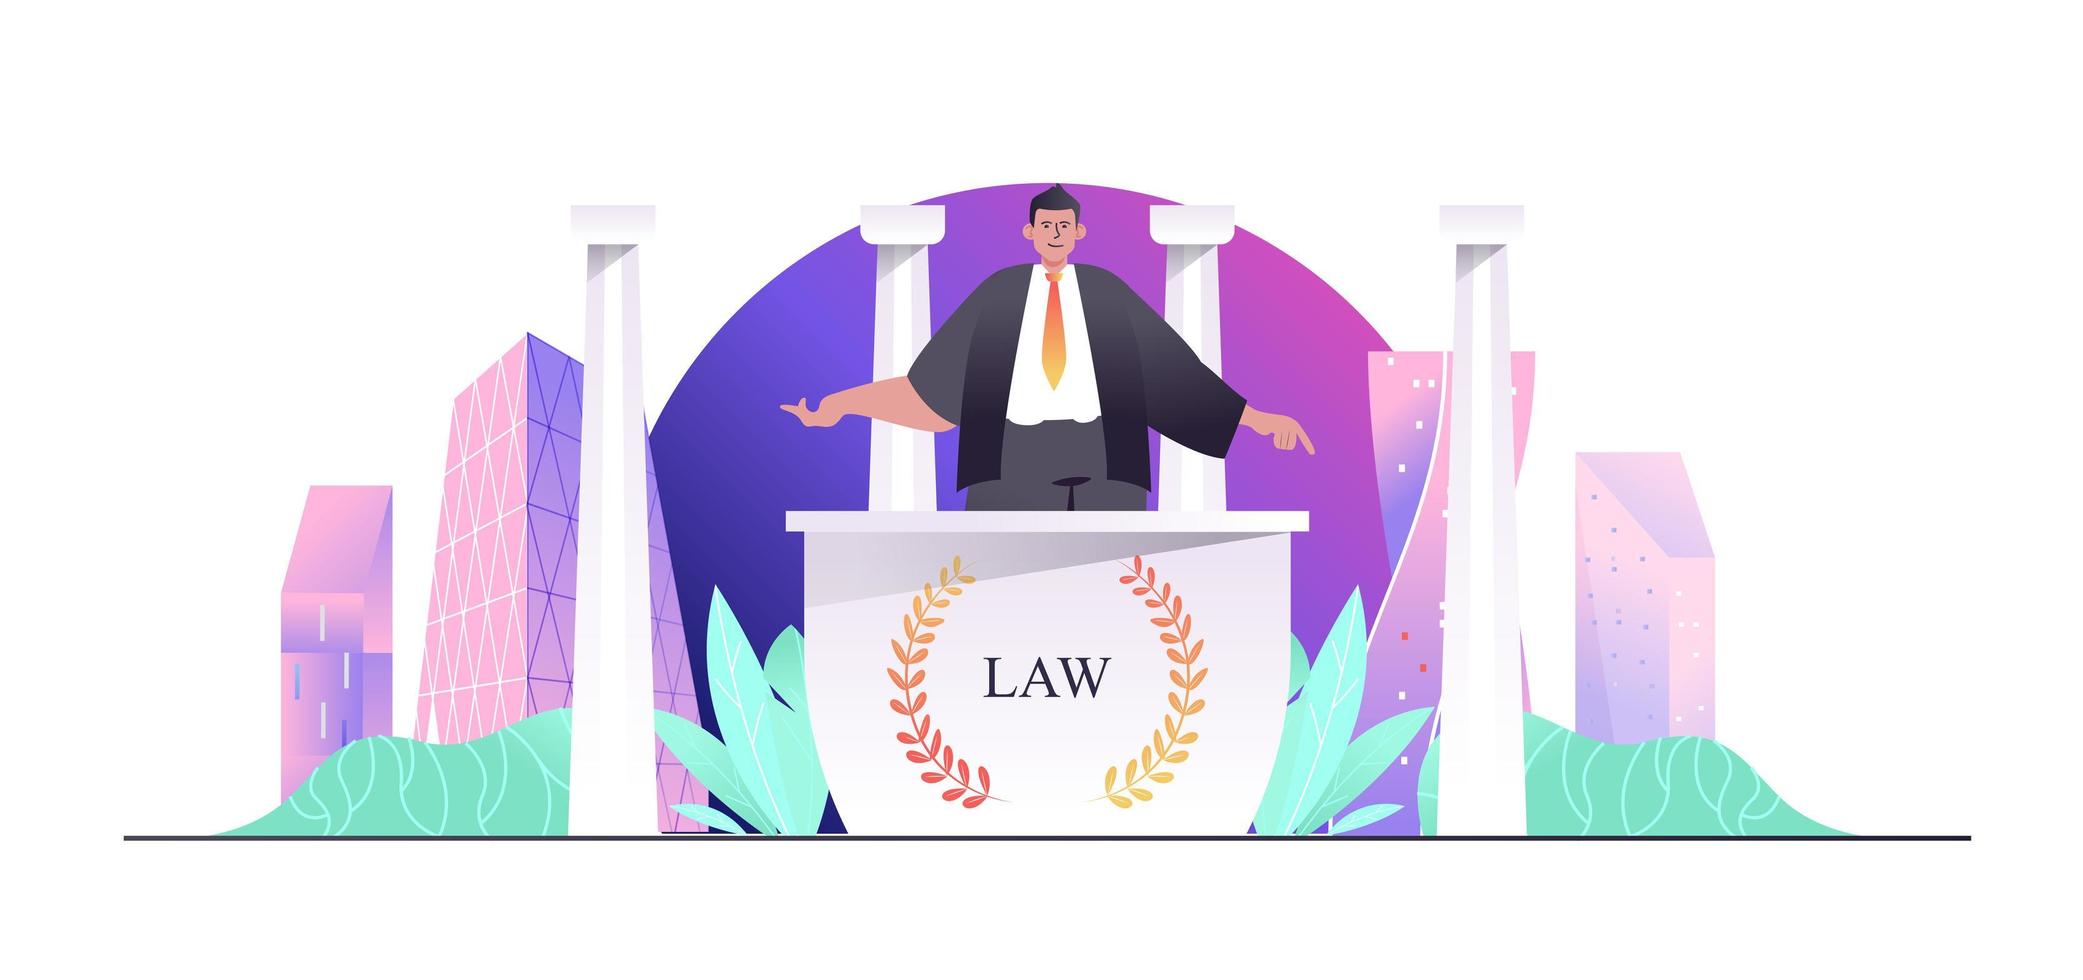 Law office concept for web banner. Lawyer or attorney consulting clients, professional legal support of business, modern people scene. Vector illustration in flat cartoon design with person characters